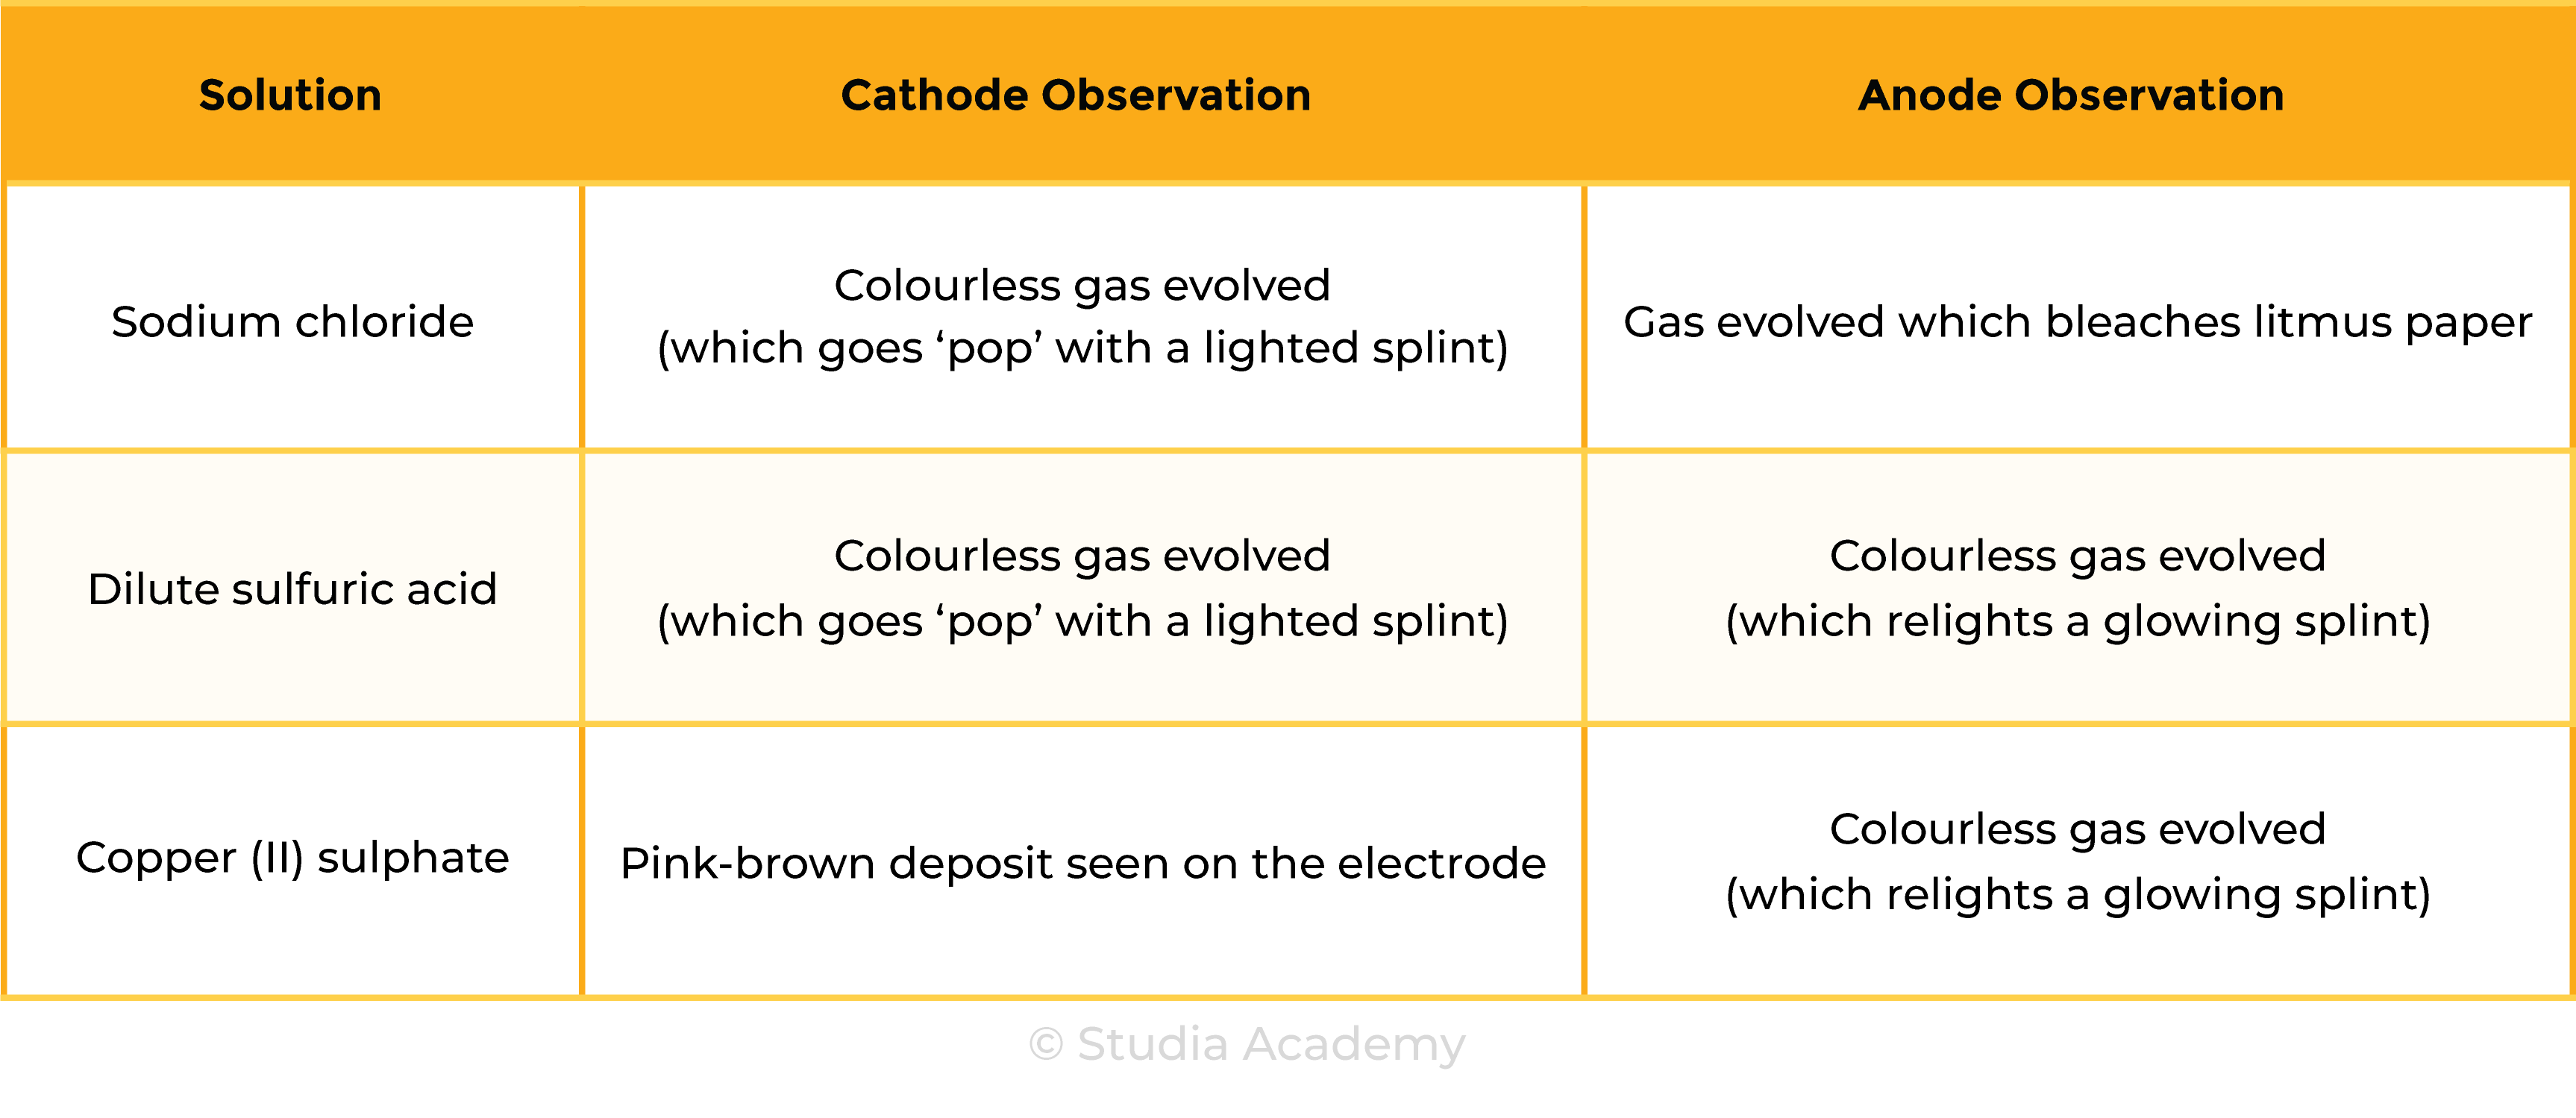 edexcel_igcse_chemistry_topic 09 tables_electrolysis_007_example cathode and anode observations